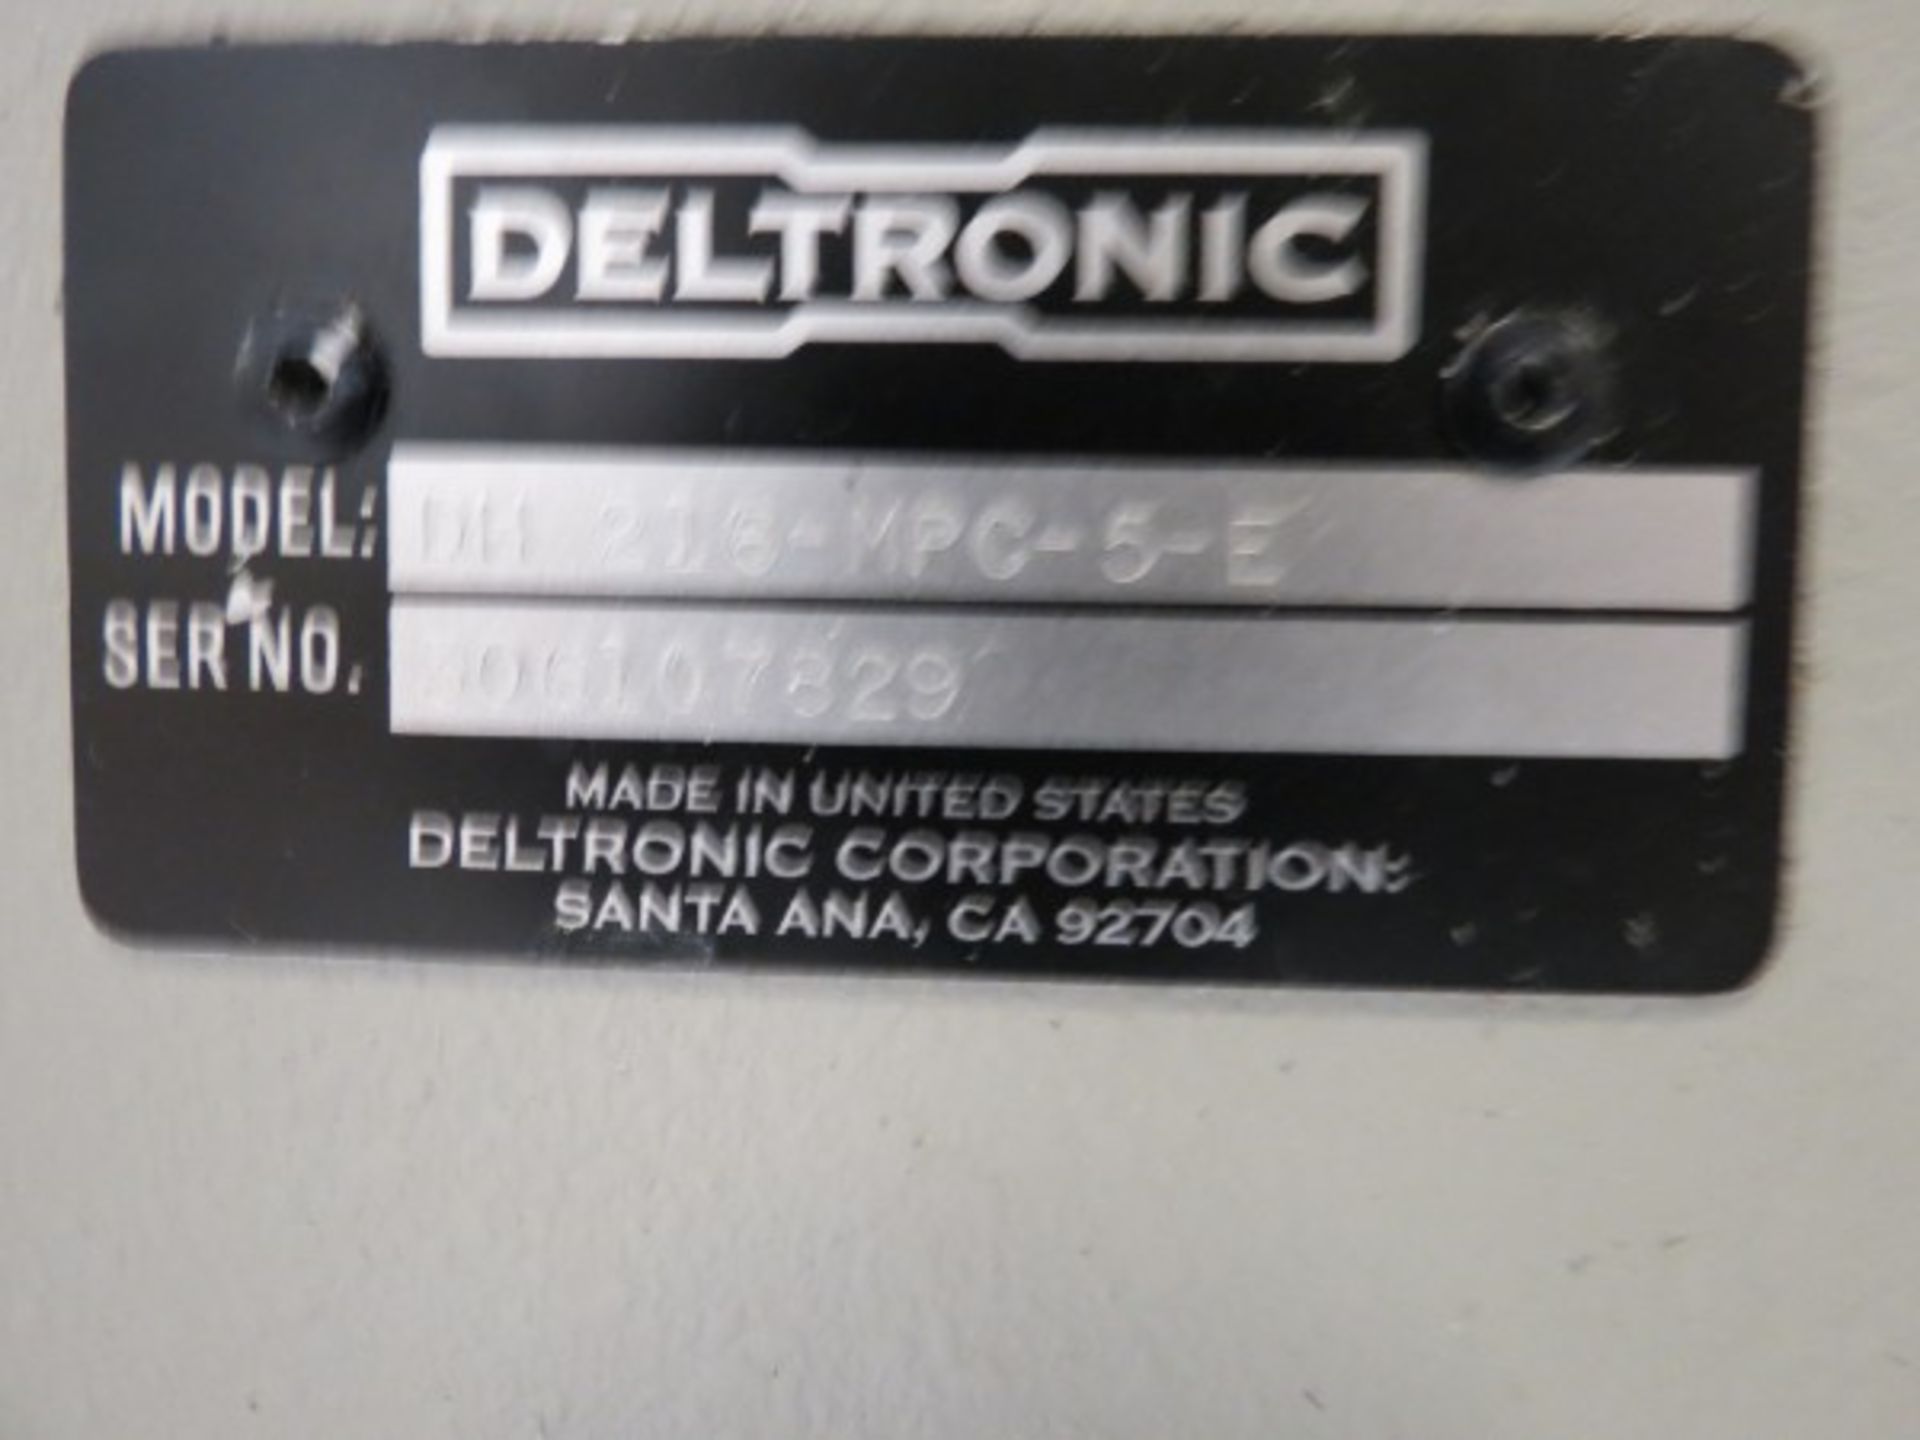 Deltronic DH216 16" Comparator, 50x magnifying lens, with DRO, S/N 306107829 - Image 5 of 5